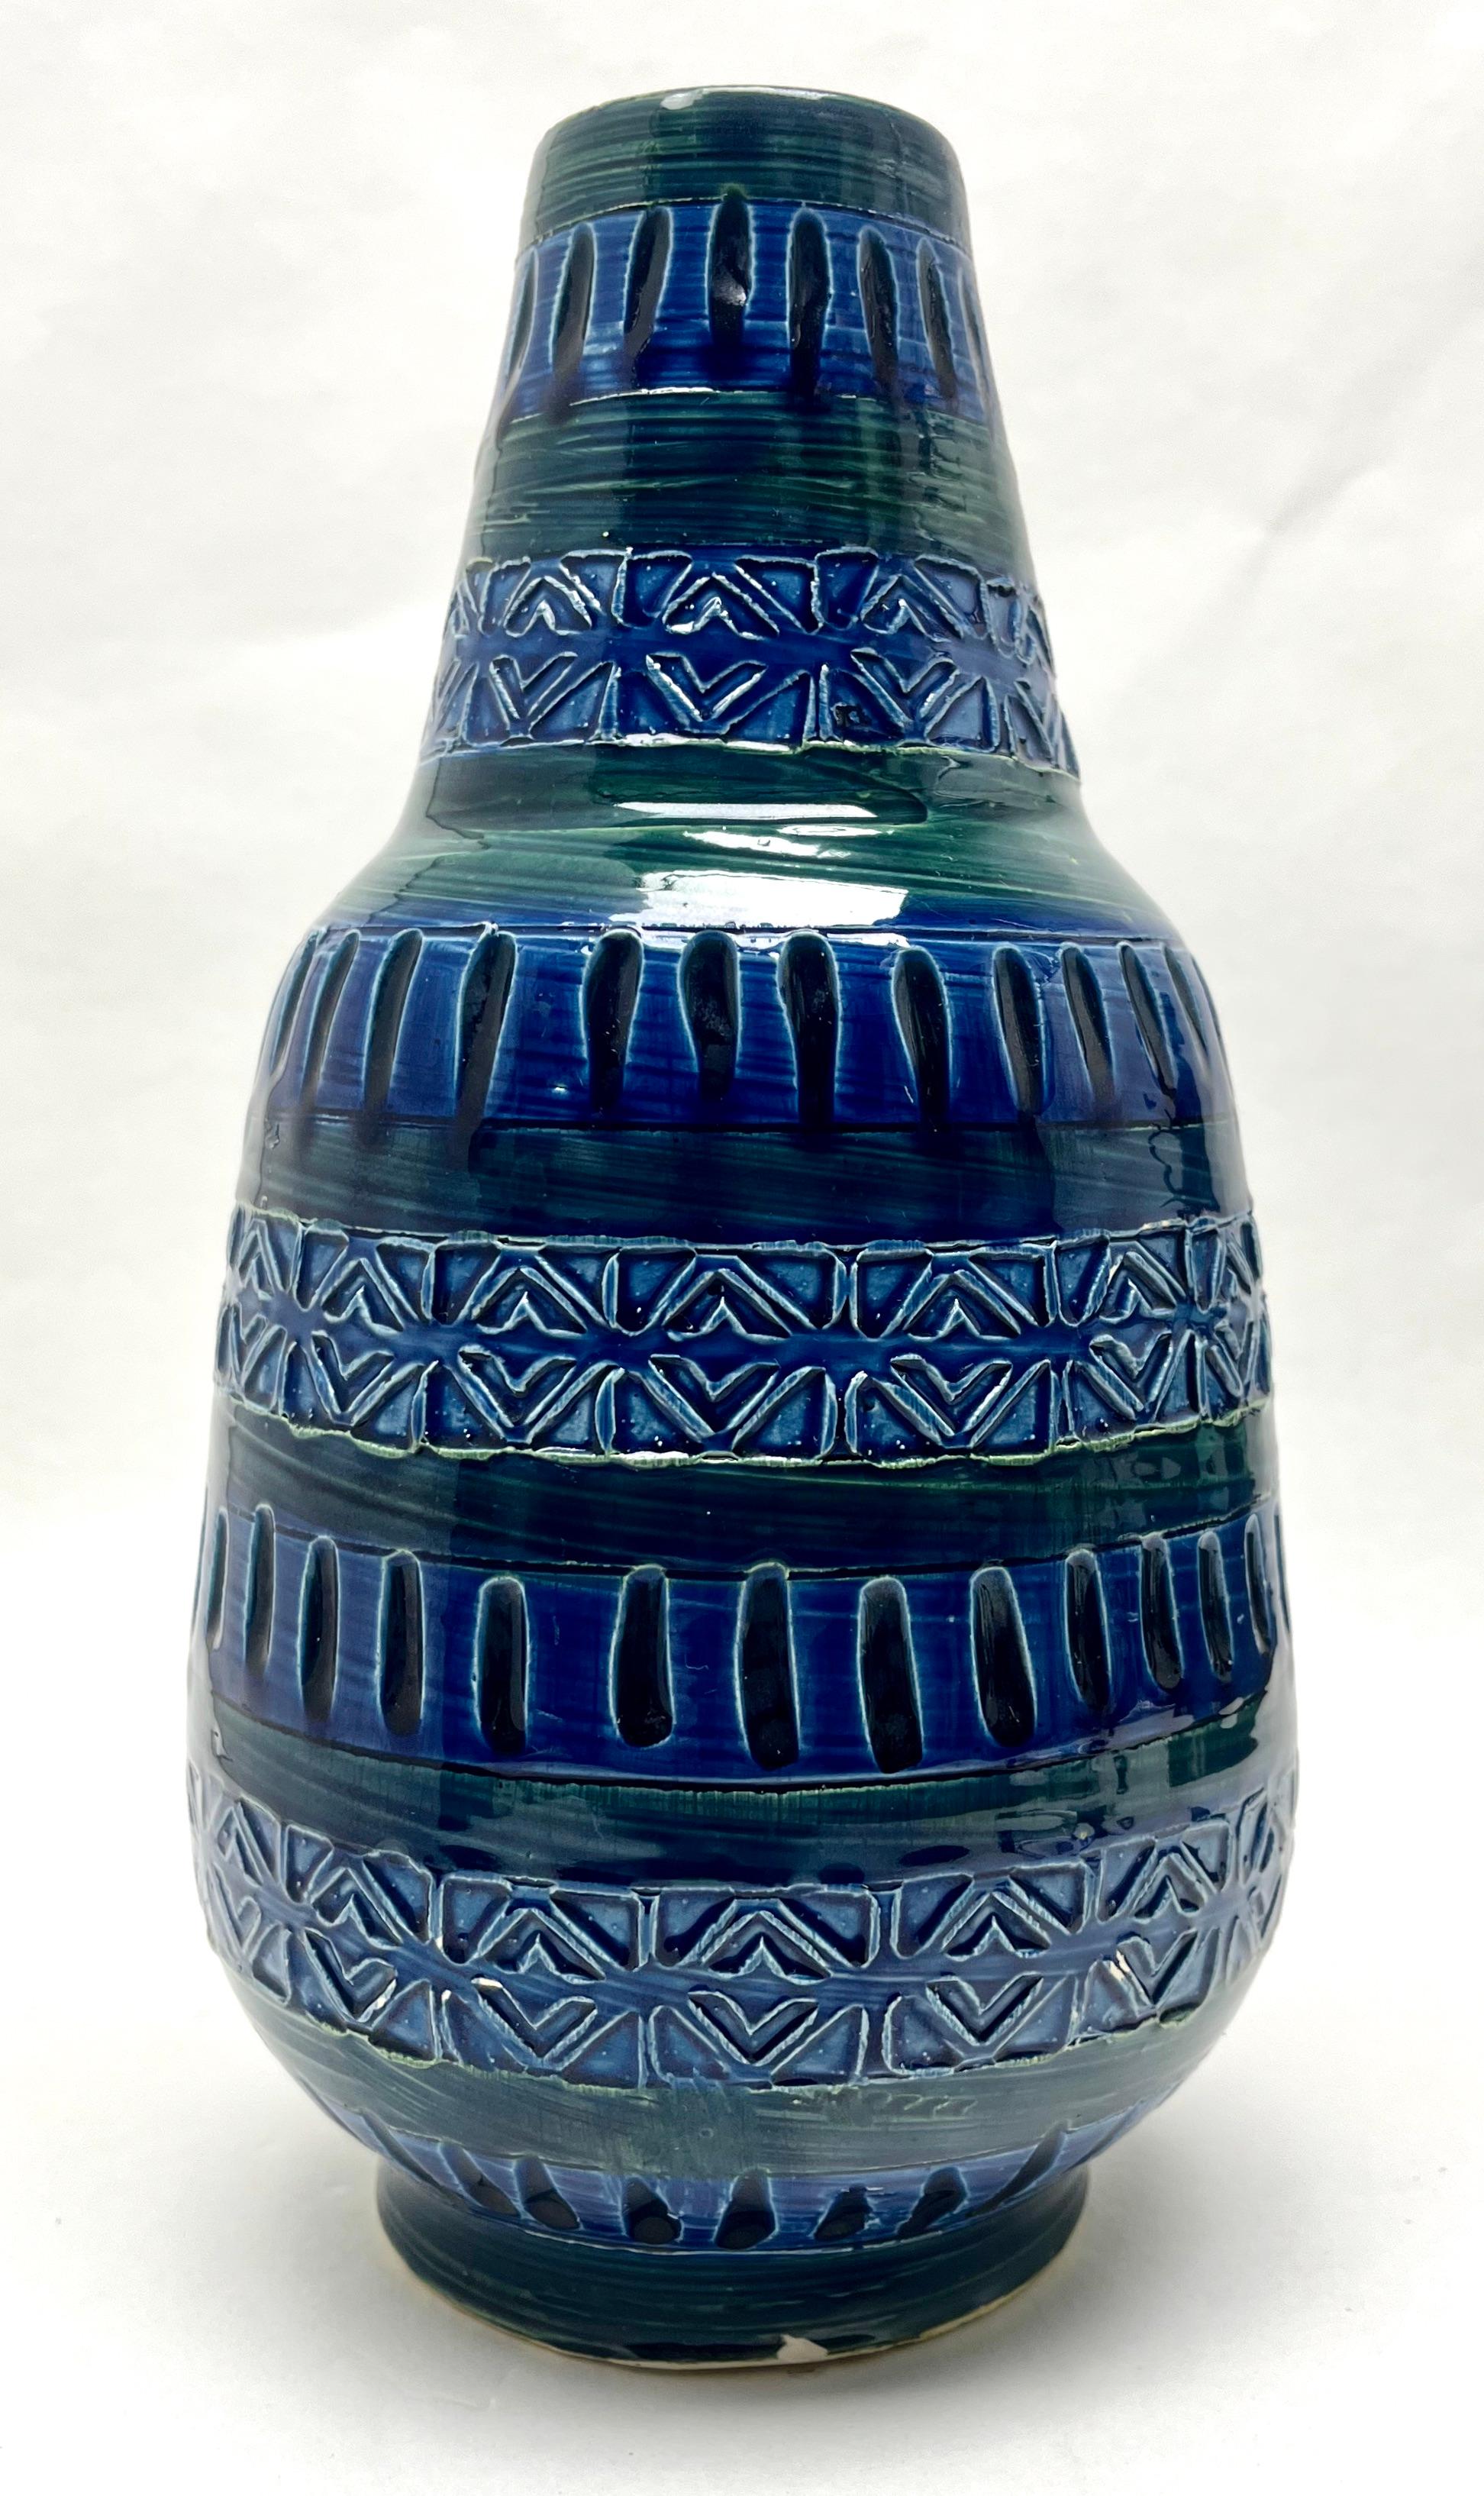 

Vintage vase in blue or black drip glaze featuring the indented
On close inspection the glaze includes flecks black and sea-blue which give greater depth to the surfaces.

Please don't hesitate to get in touch with any further